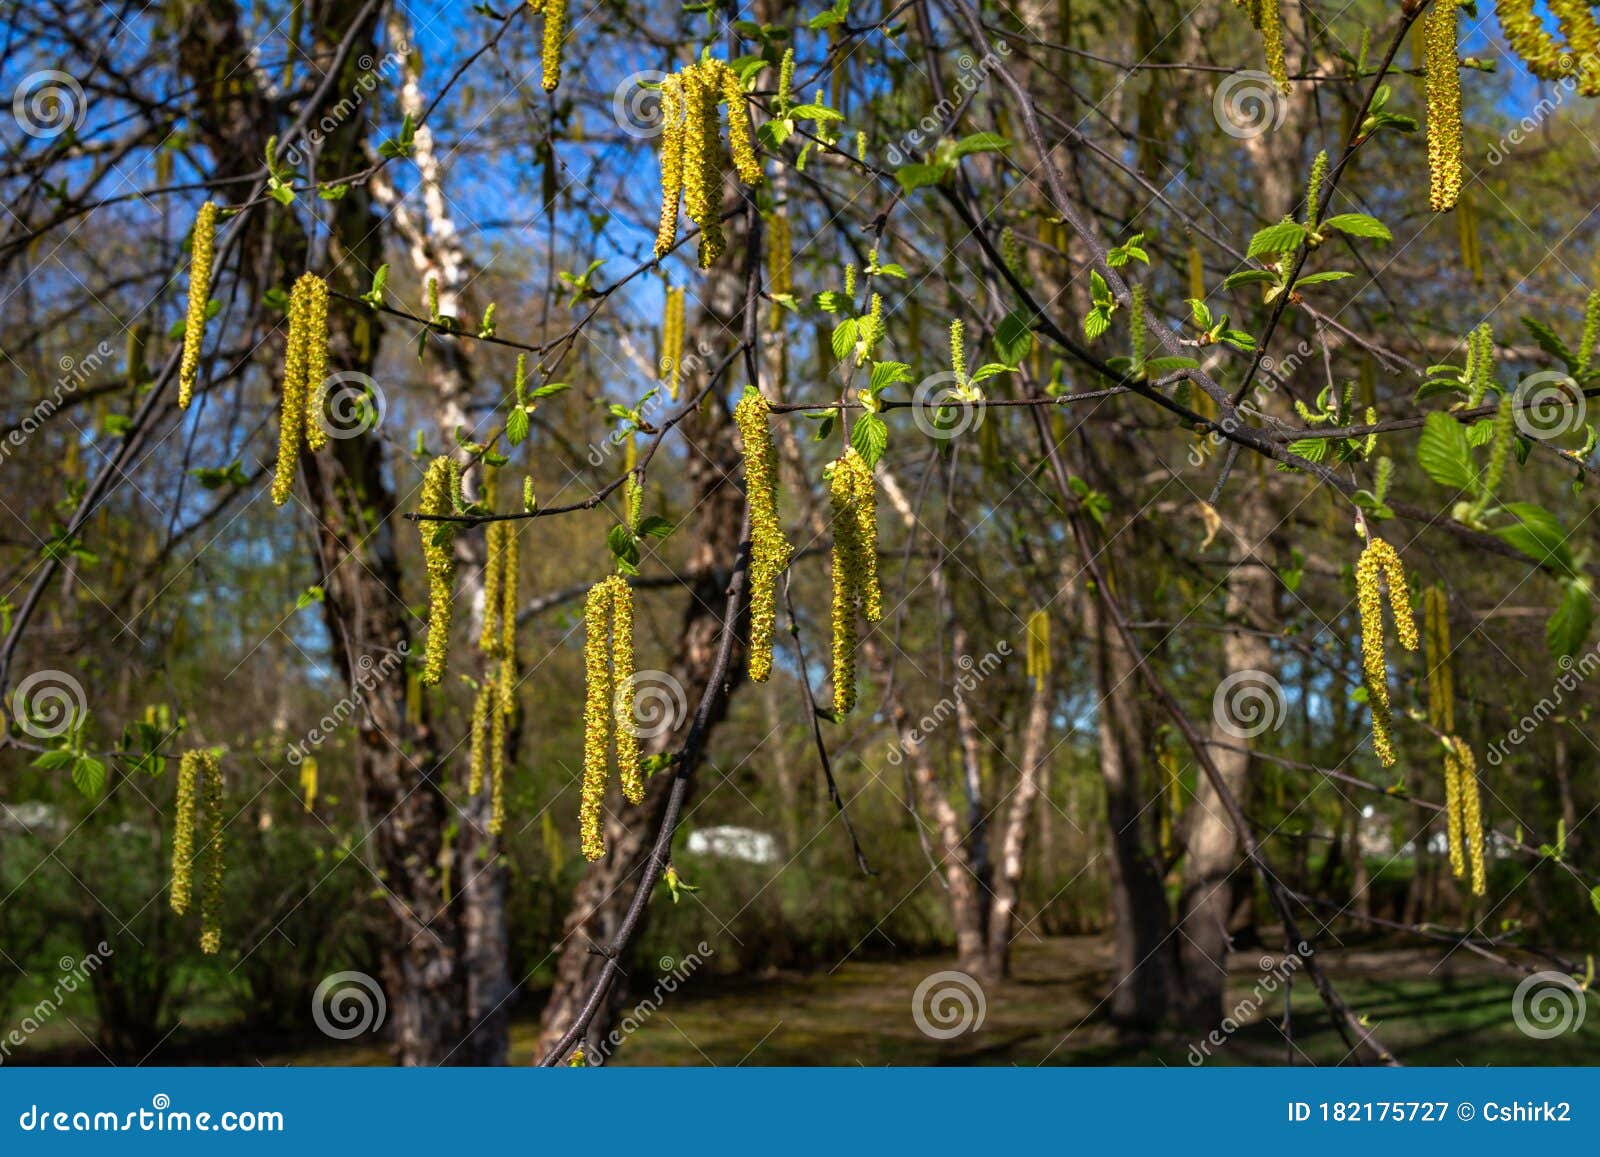 emerging bright yellow catkins on a river birch tree